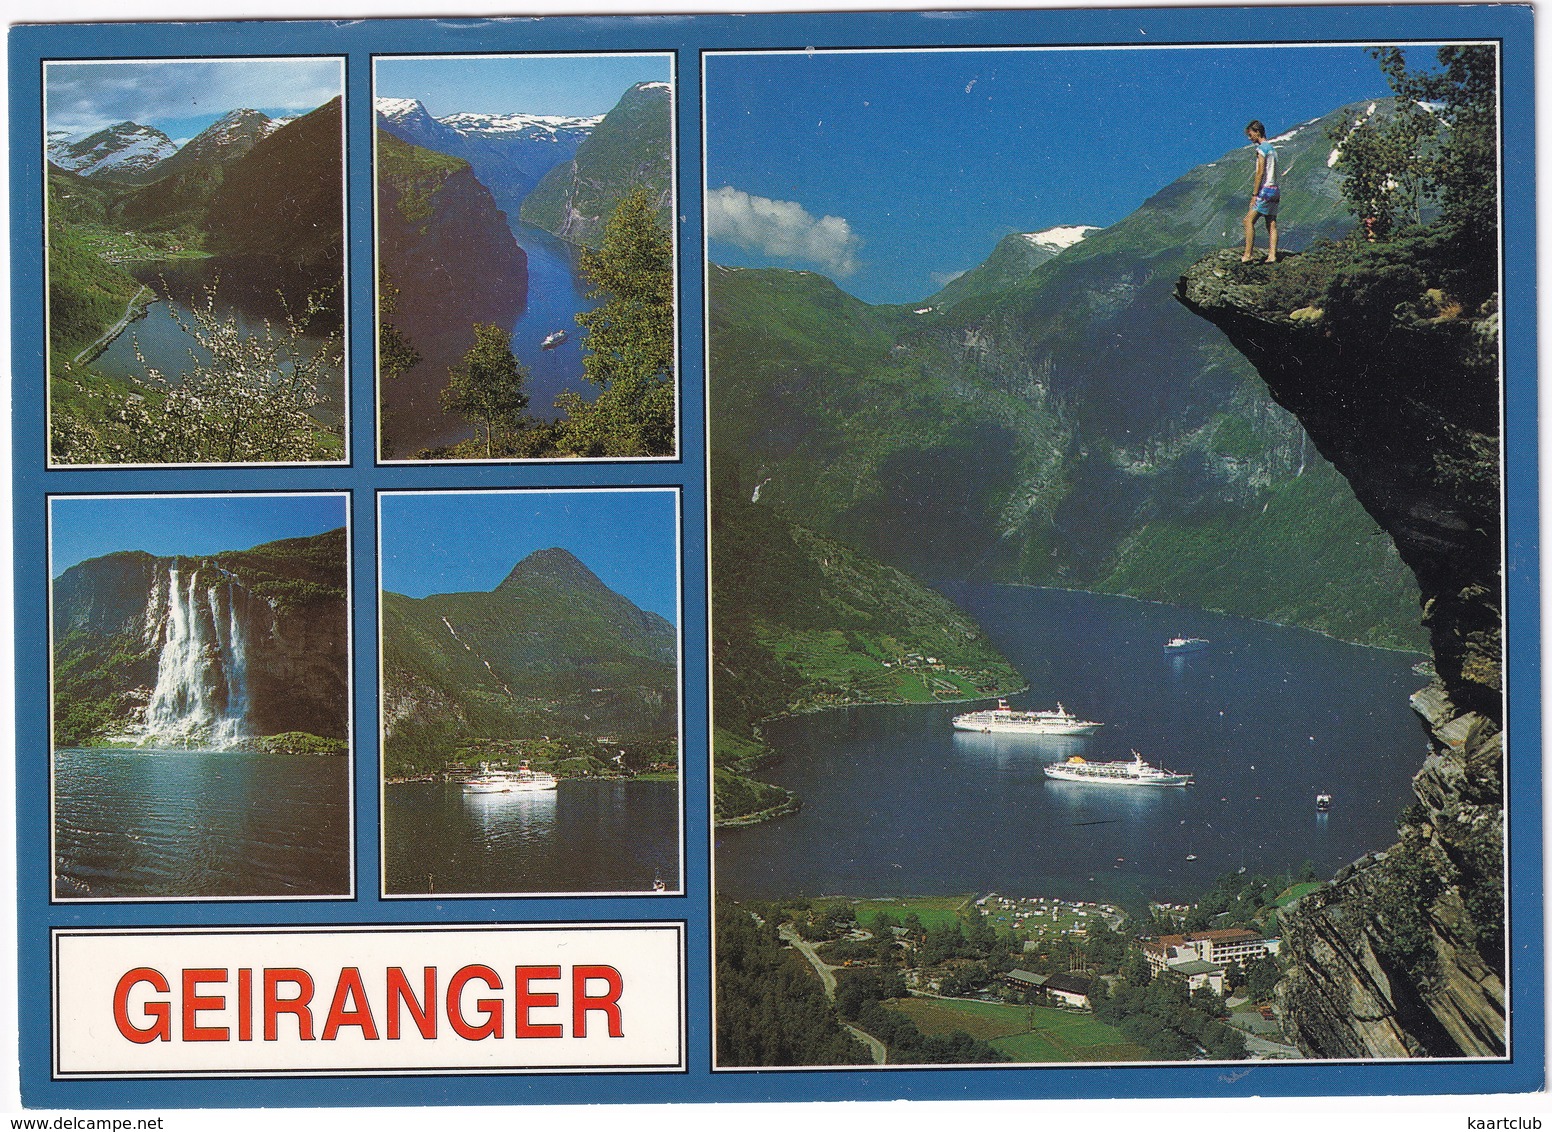 Geiranger - The Geiranger Fjord - Cruise-ships - Norge - Norway - Norvège